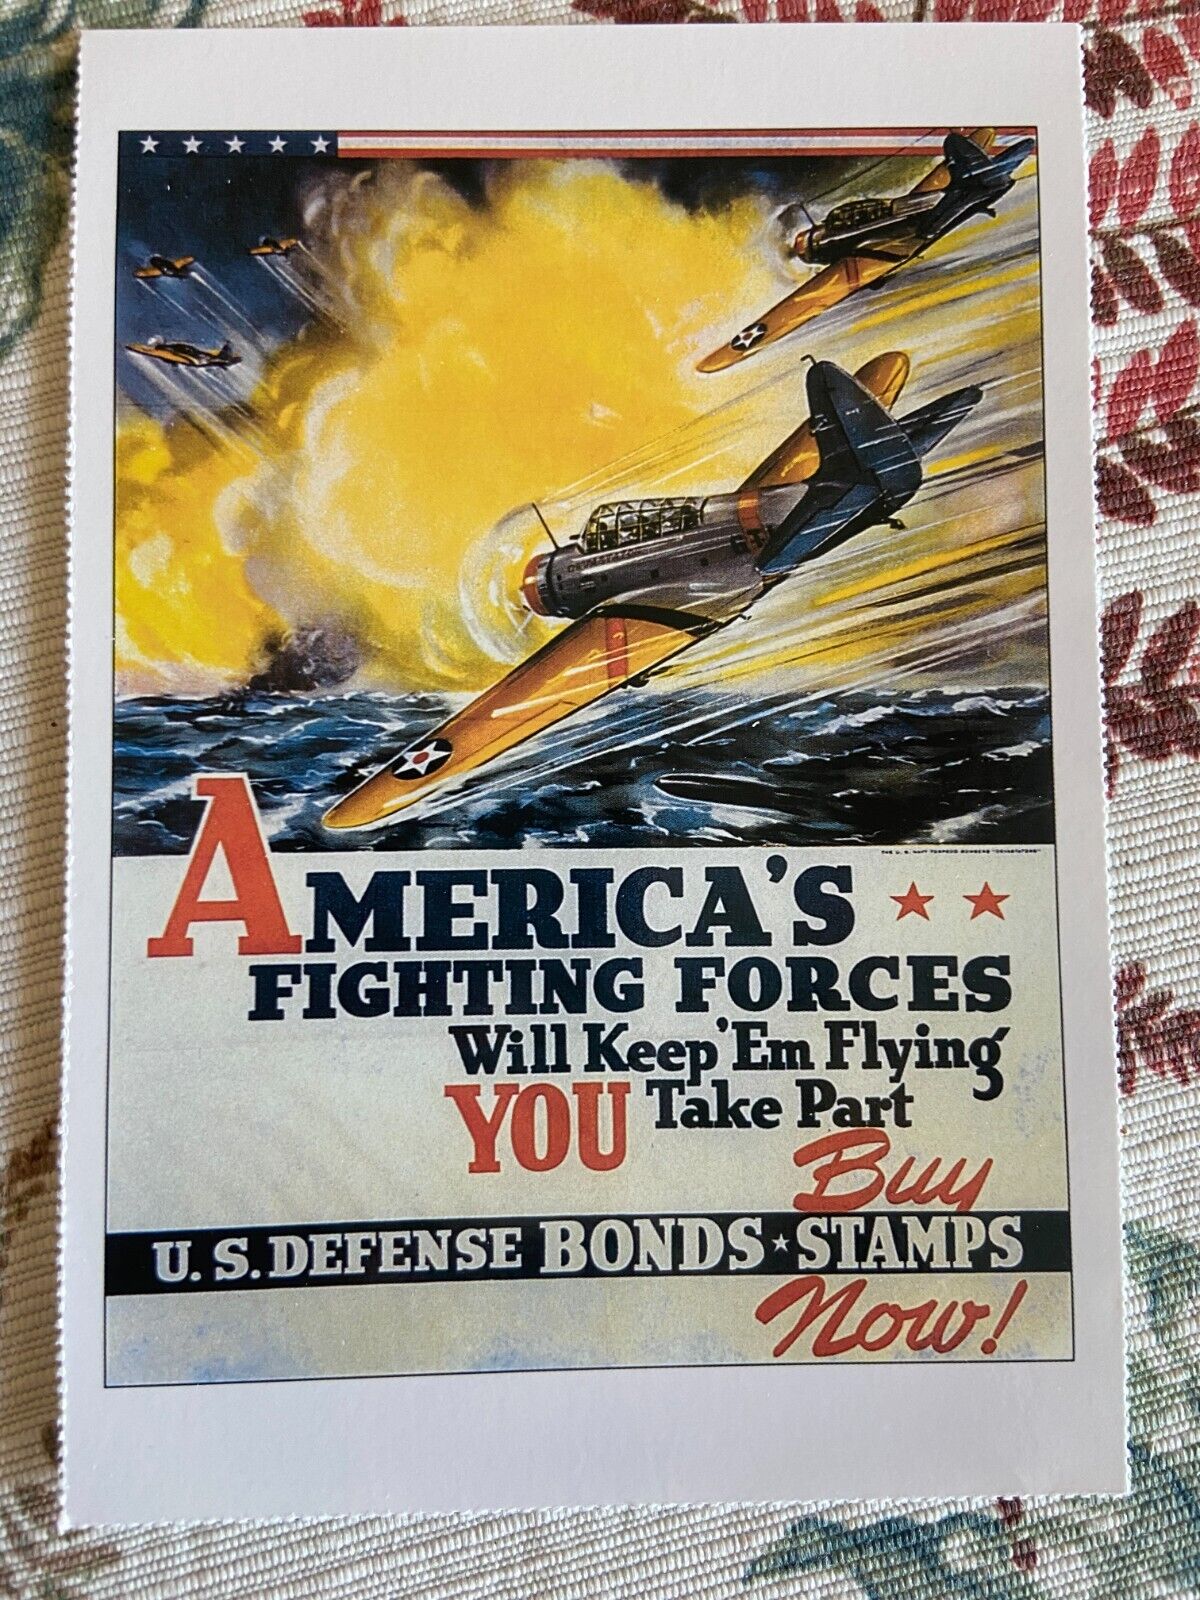 vintage postcard WWII propaganda Americas fighting forces buy bonds stamps